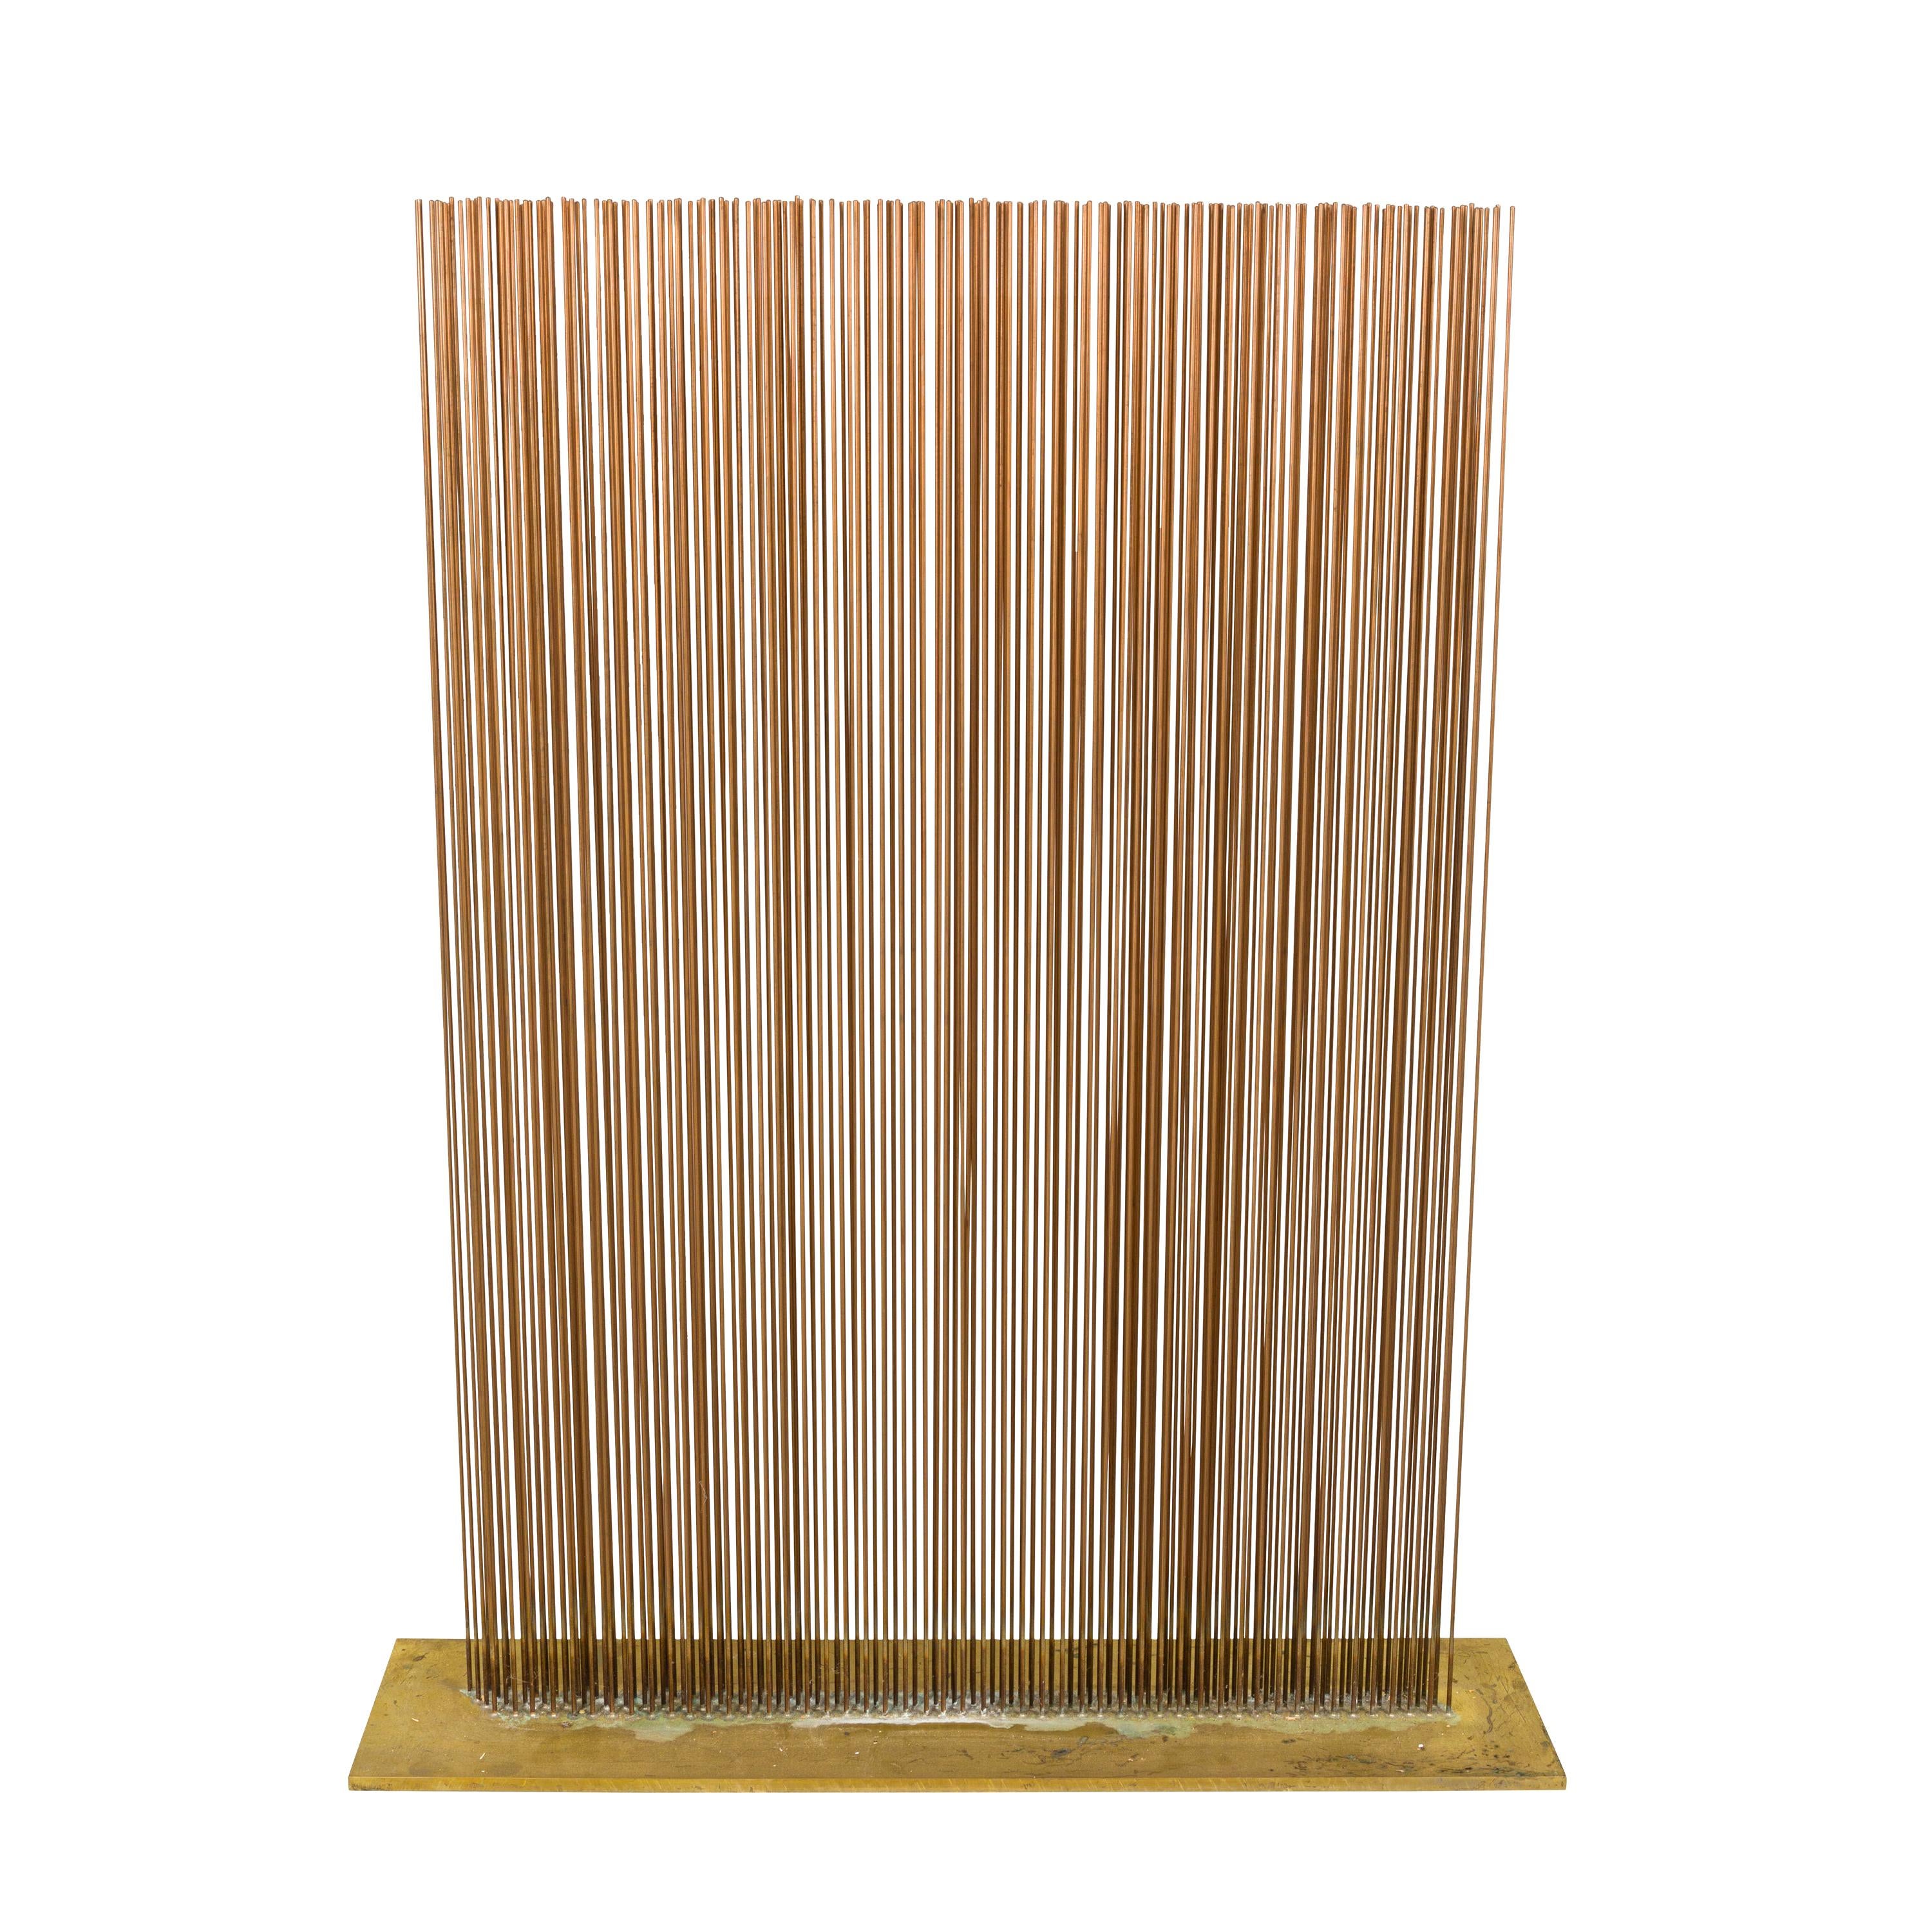 Val Bertoia Linear Four-Row Copper and Brass Sonambient Sculpture, USA 2018